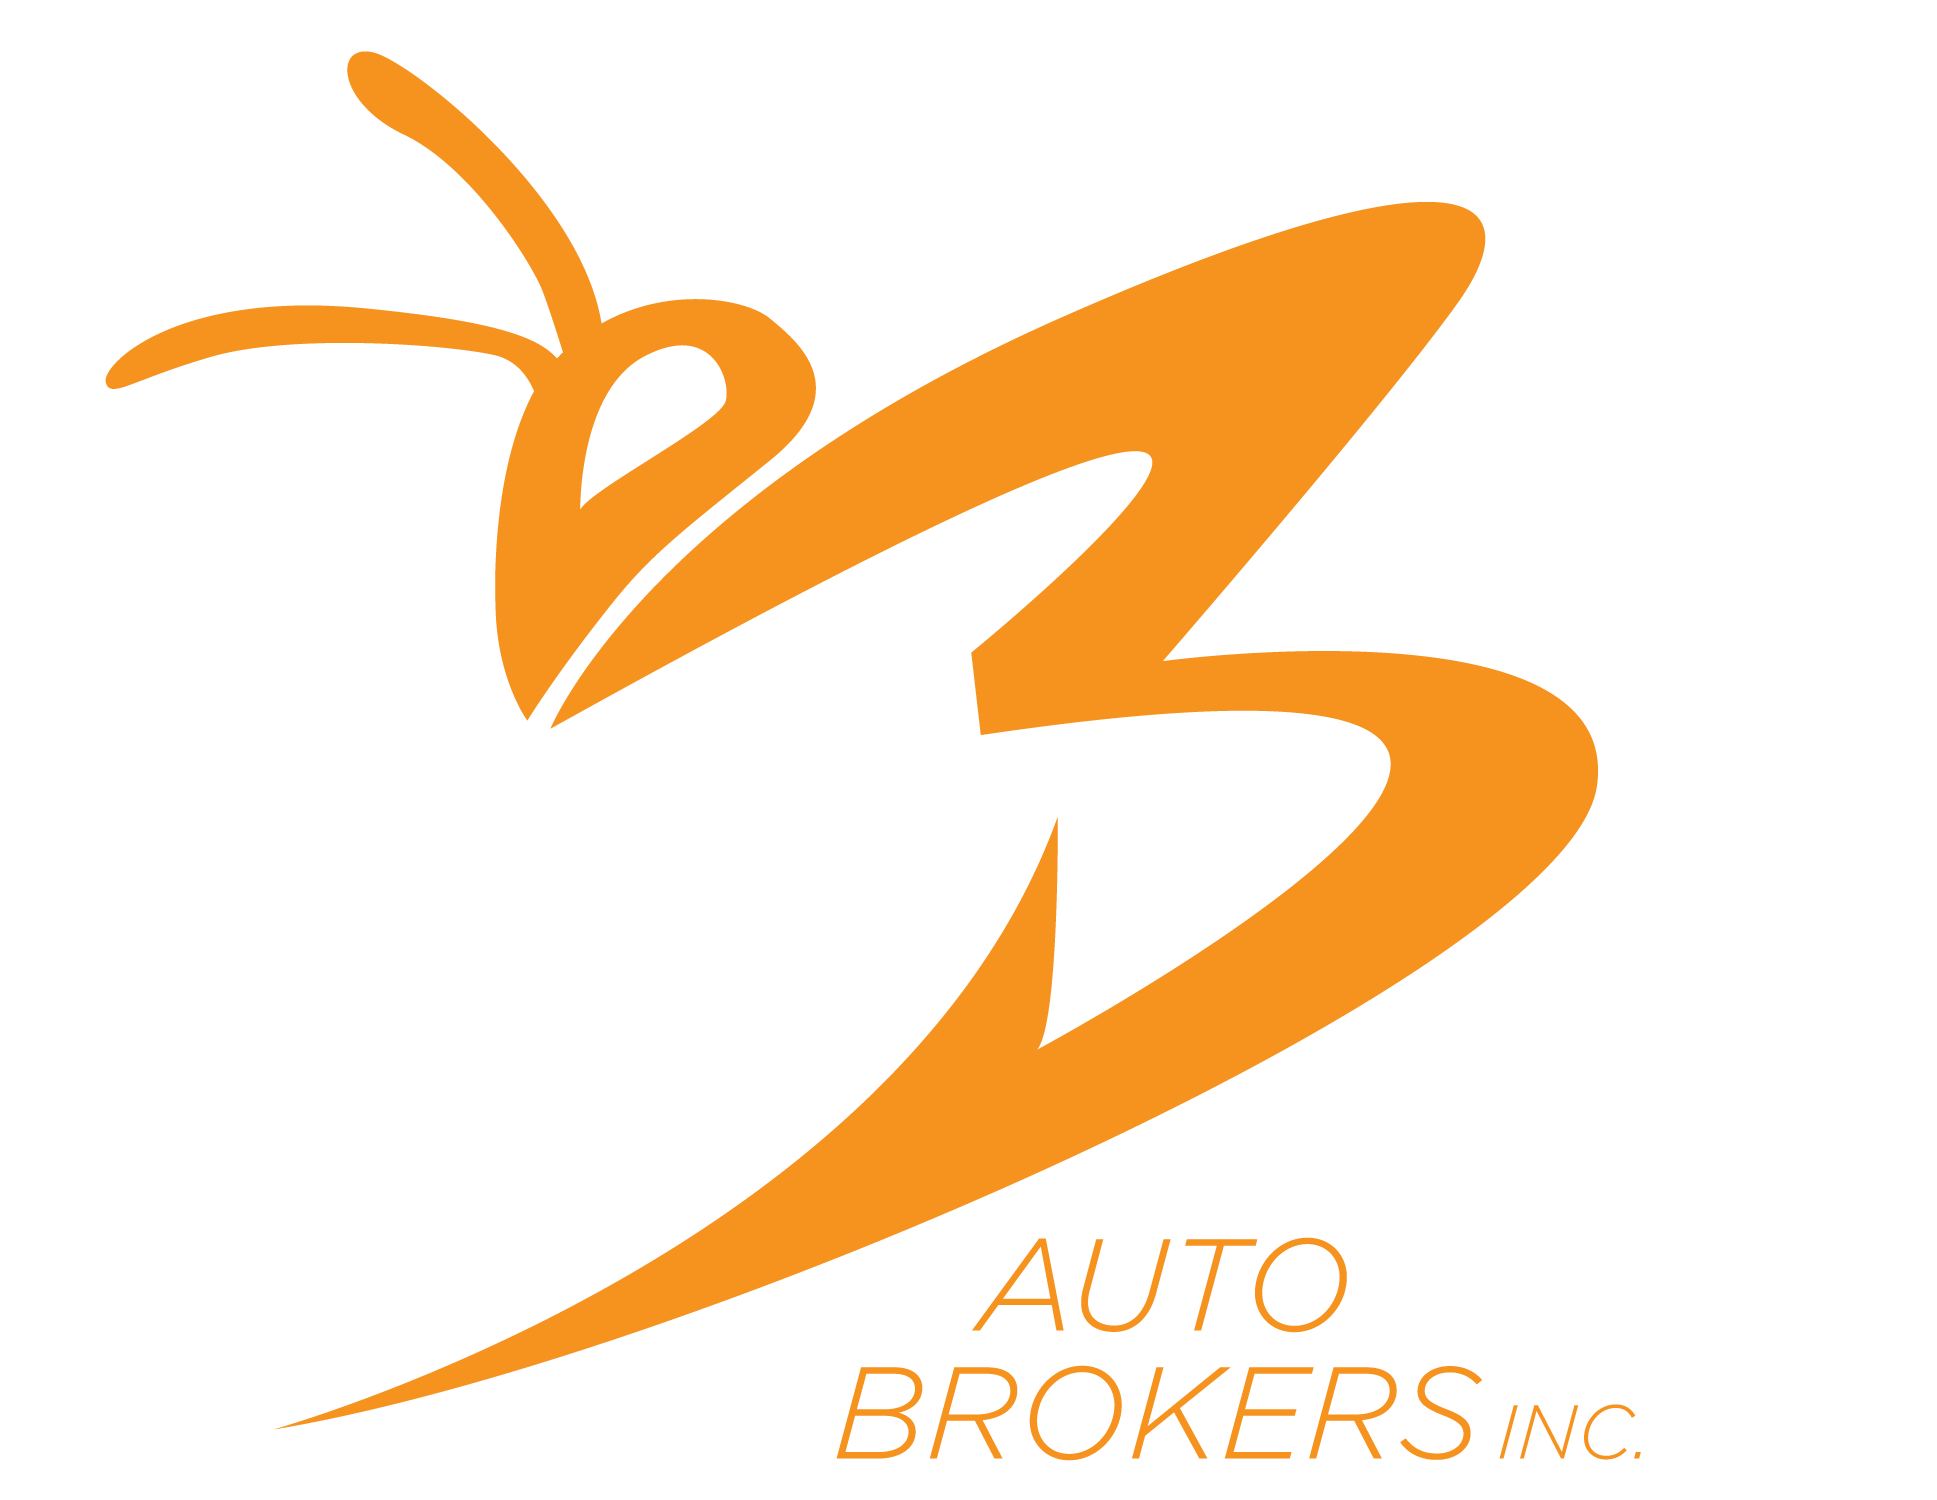 3 B Logo - 3b Auto Brokers | The Leading Auto Brokers in Los Angeles